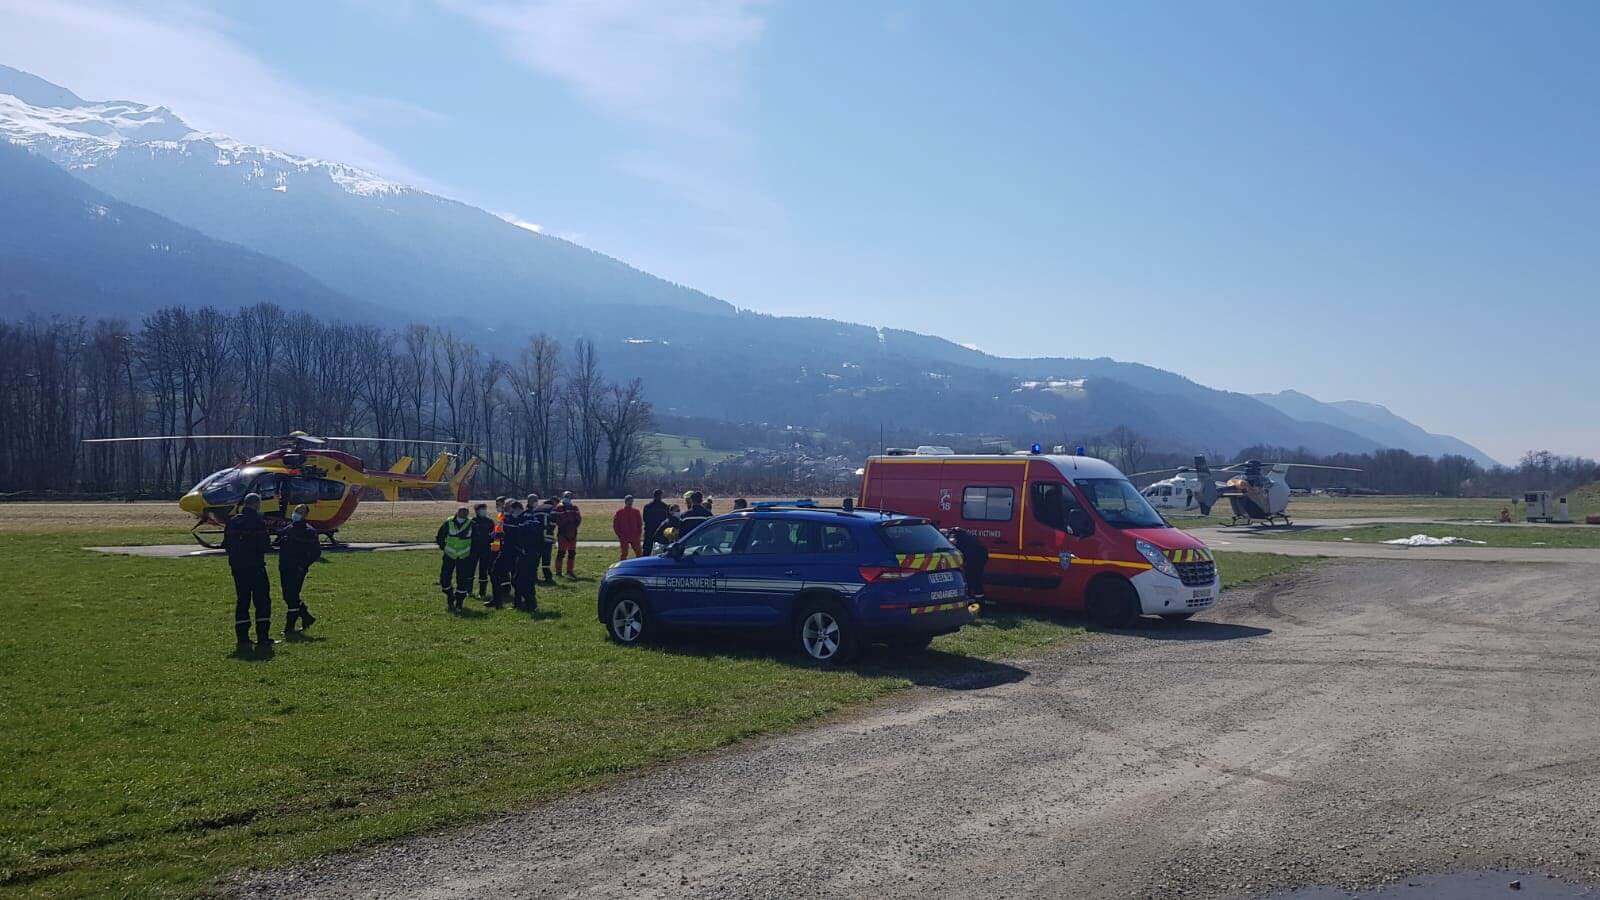 Accident Avion Albertville (August 2022) Two People Died in an Accident Involving a Tourist Plane in Albertville, Savoie!